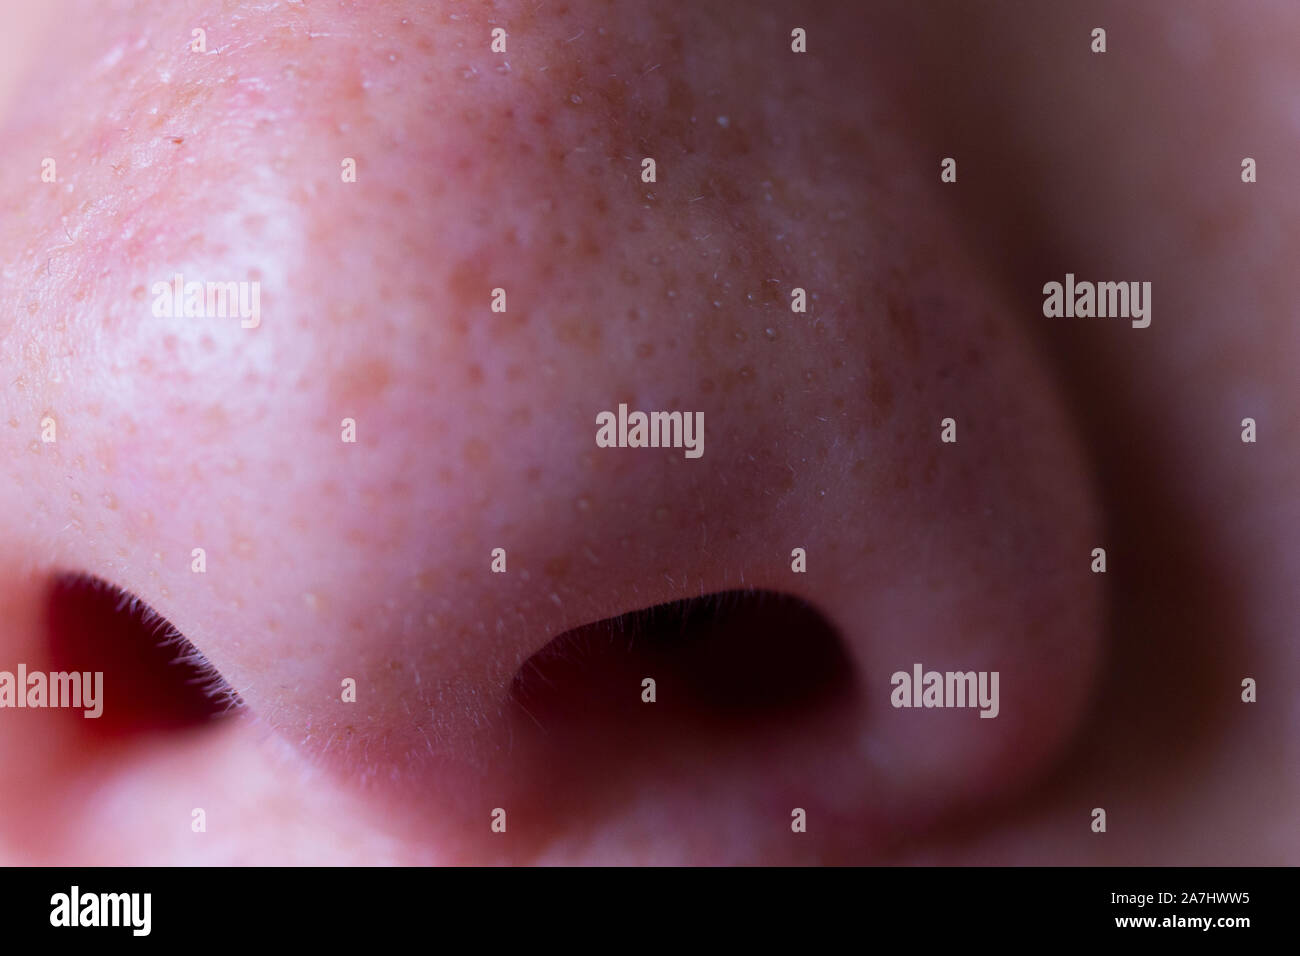 Close Up Of Woman Nose With Red Spots Stock Photo Alamy